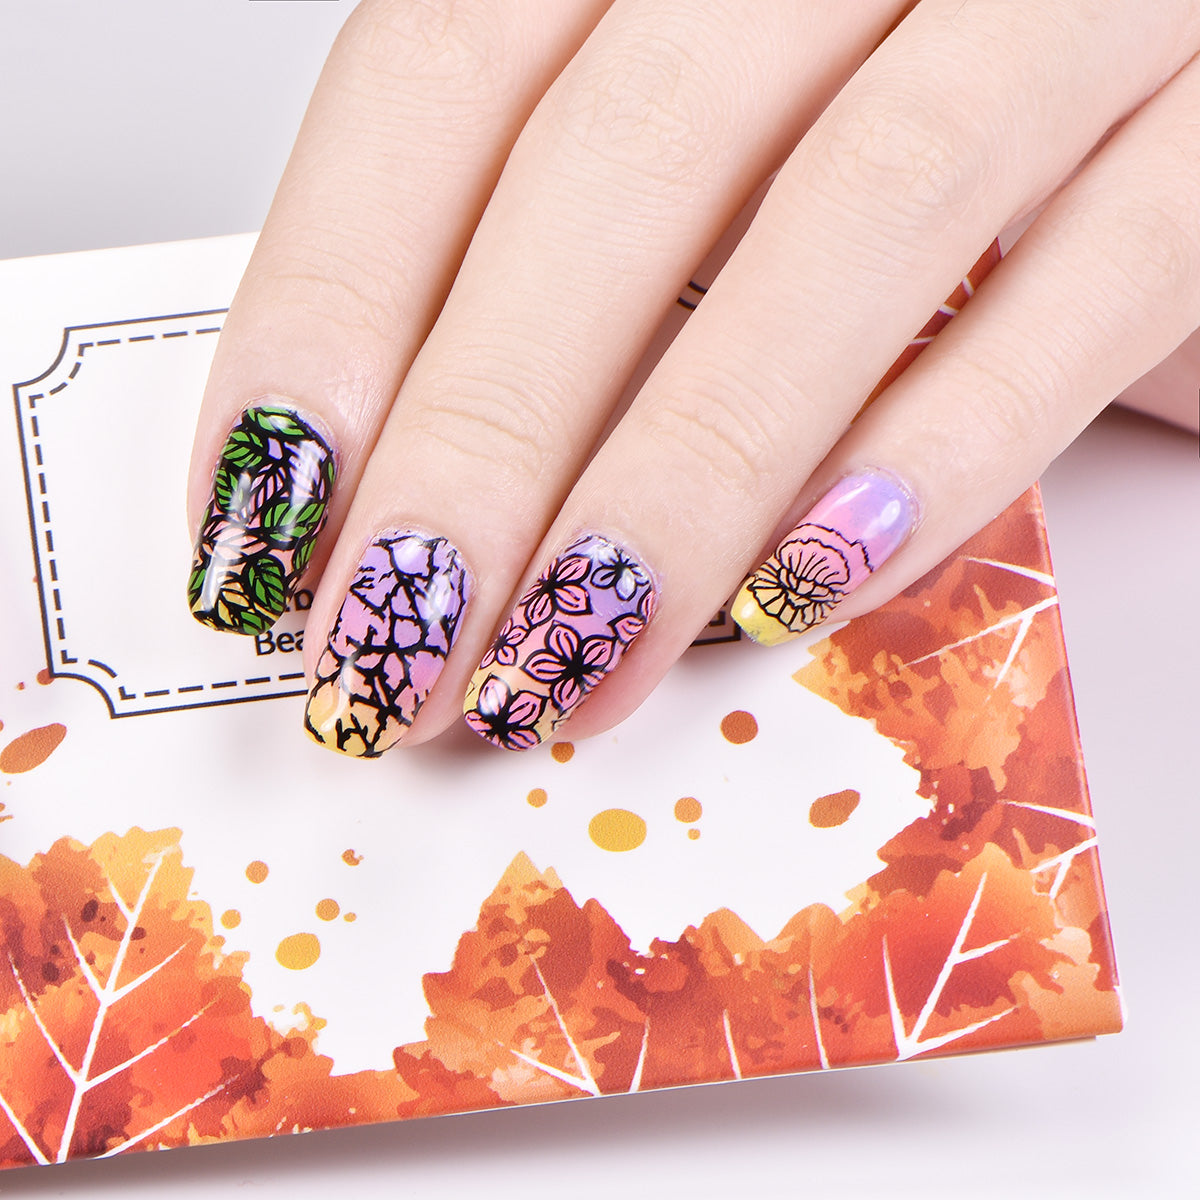 BEAUTYBIGBANG 4Pcs Nail Stamping Plate Veins Theme - Marble Leaves